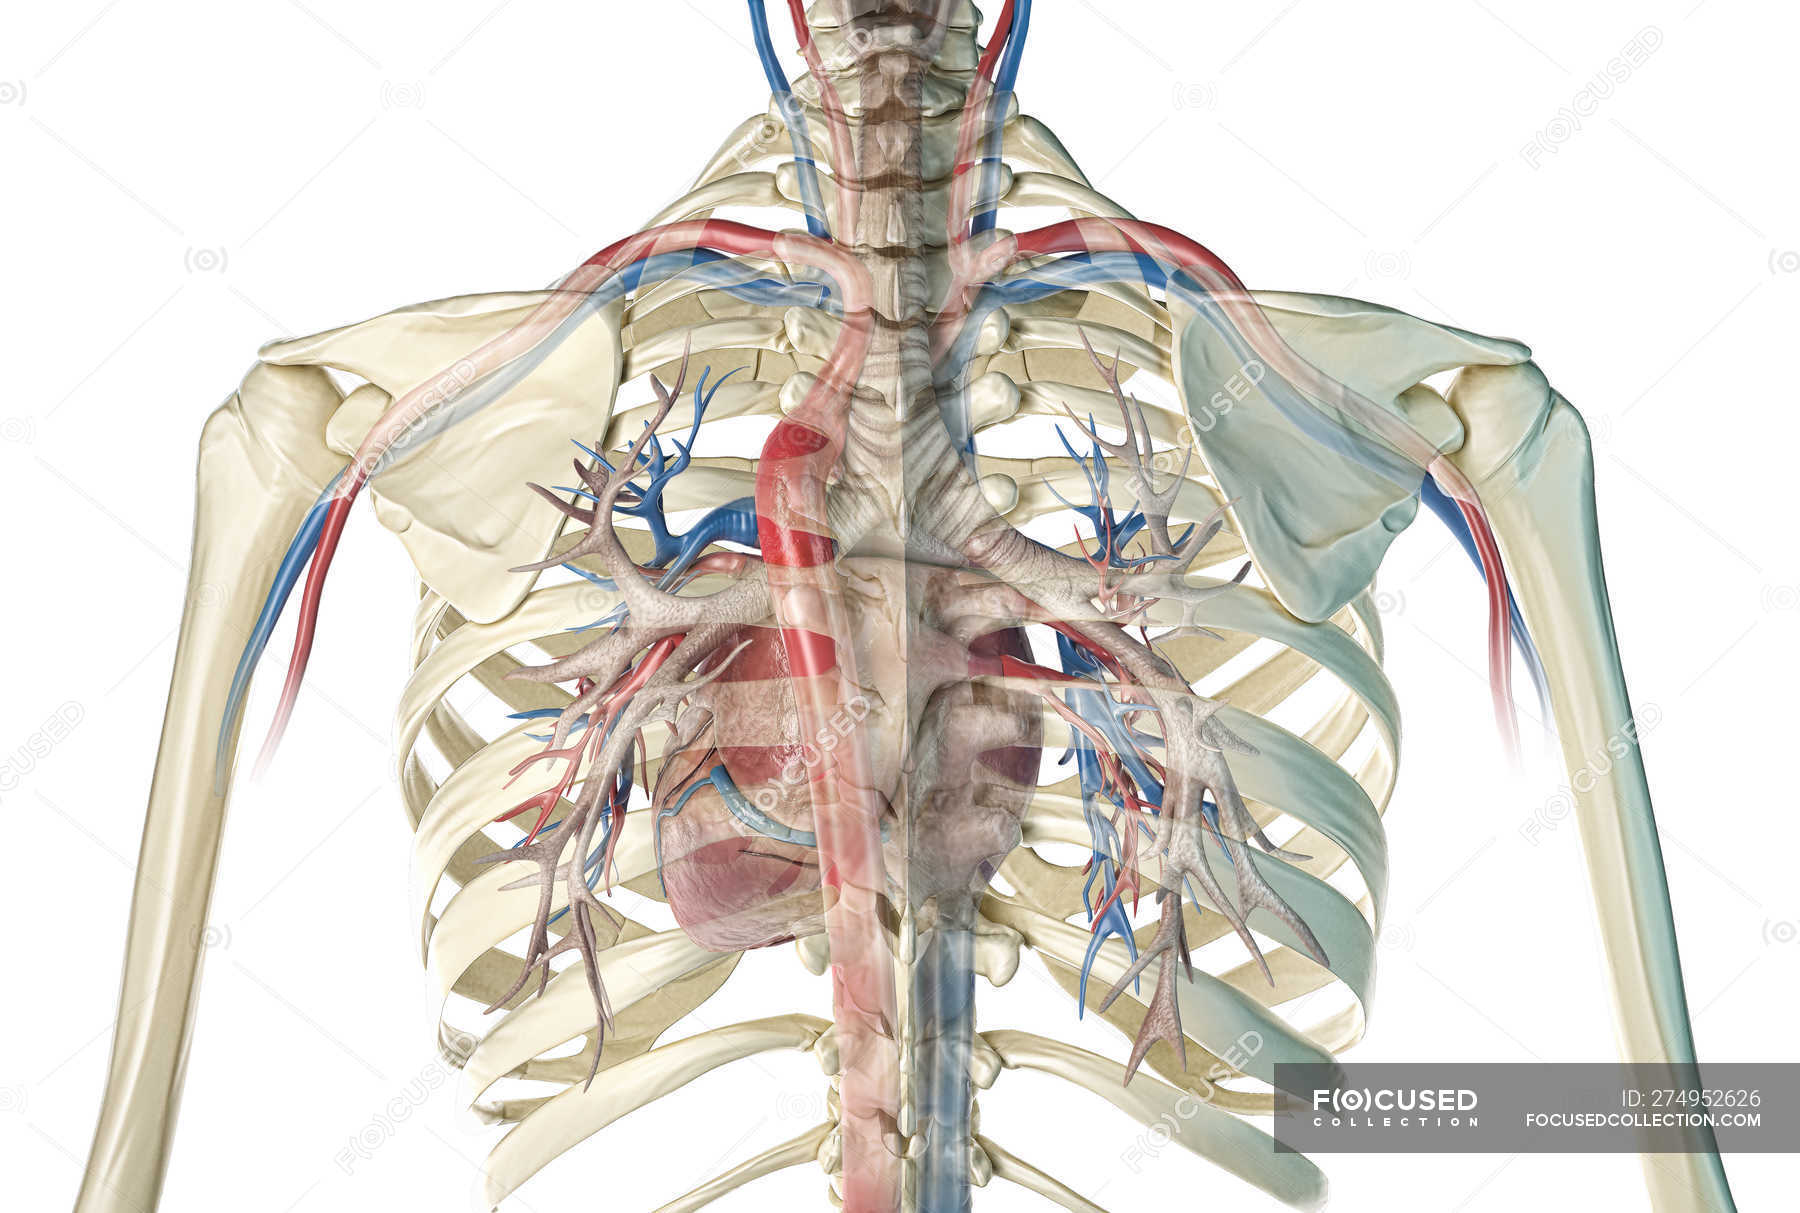 Human Rib Cage Showing Heart With Vessels And Bronchial Tree On White Background Tissue Lungs Stock Photo 274952626